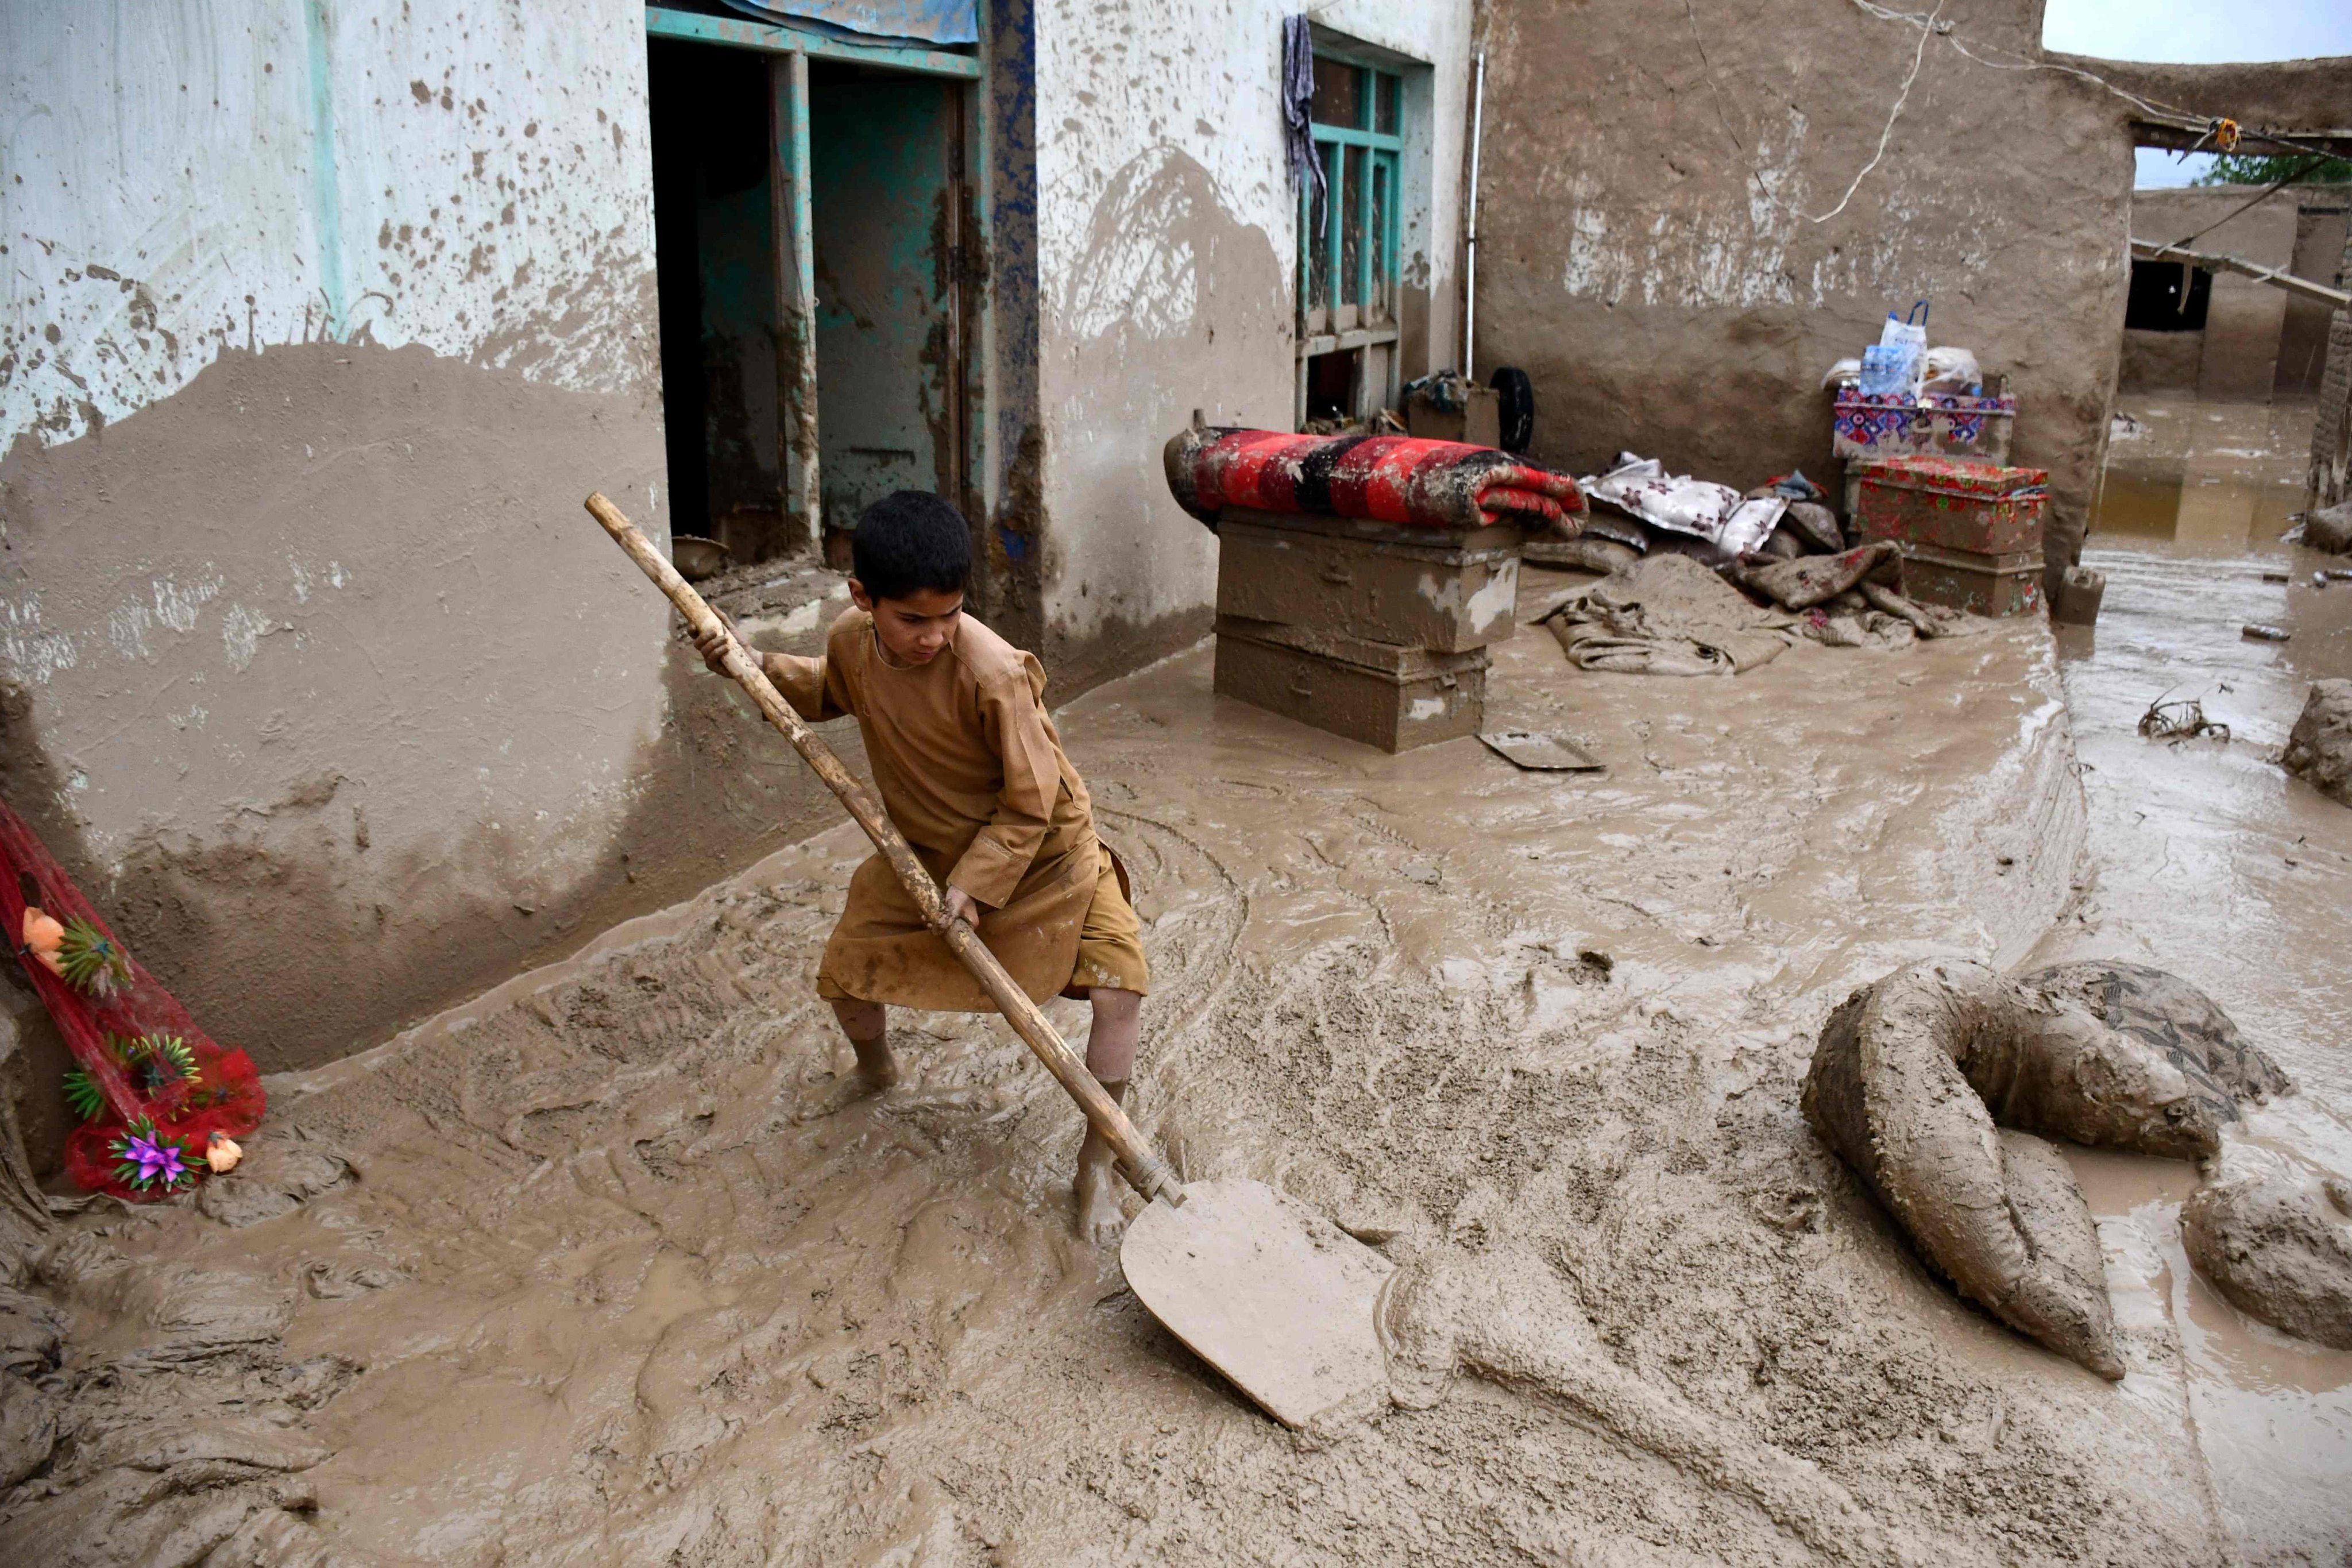 An Afghan boy shovels mud from the courtyard of a house in the Baghlan-e-Markazi district of Baghlan province. Hundreds of people are thought to have died in the nation after flash floods on Friday. Photo: AFP